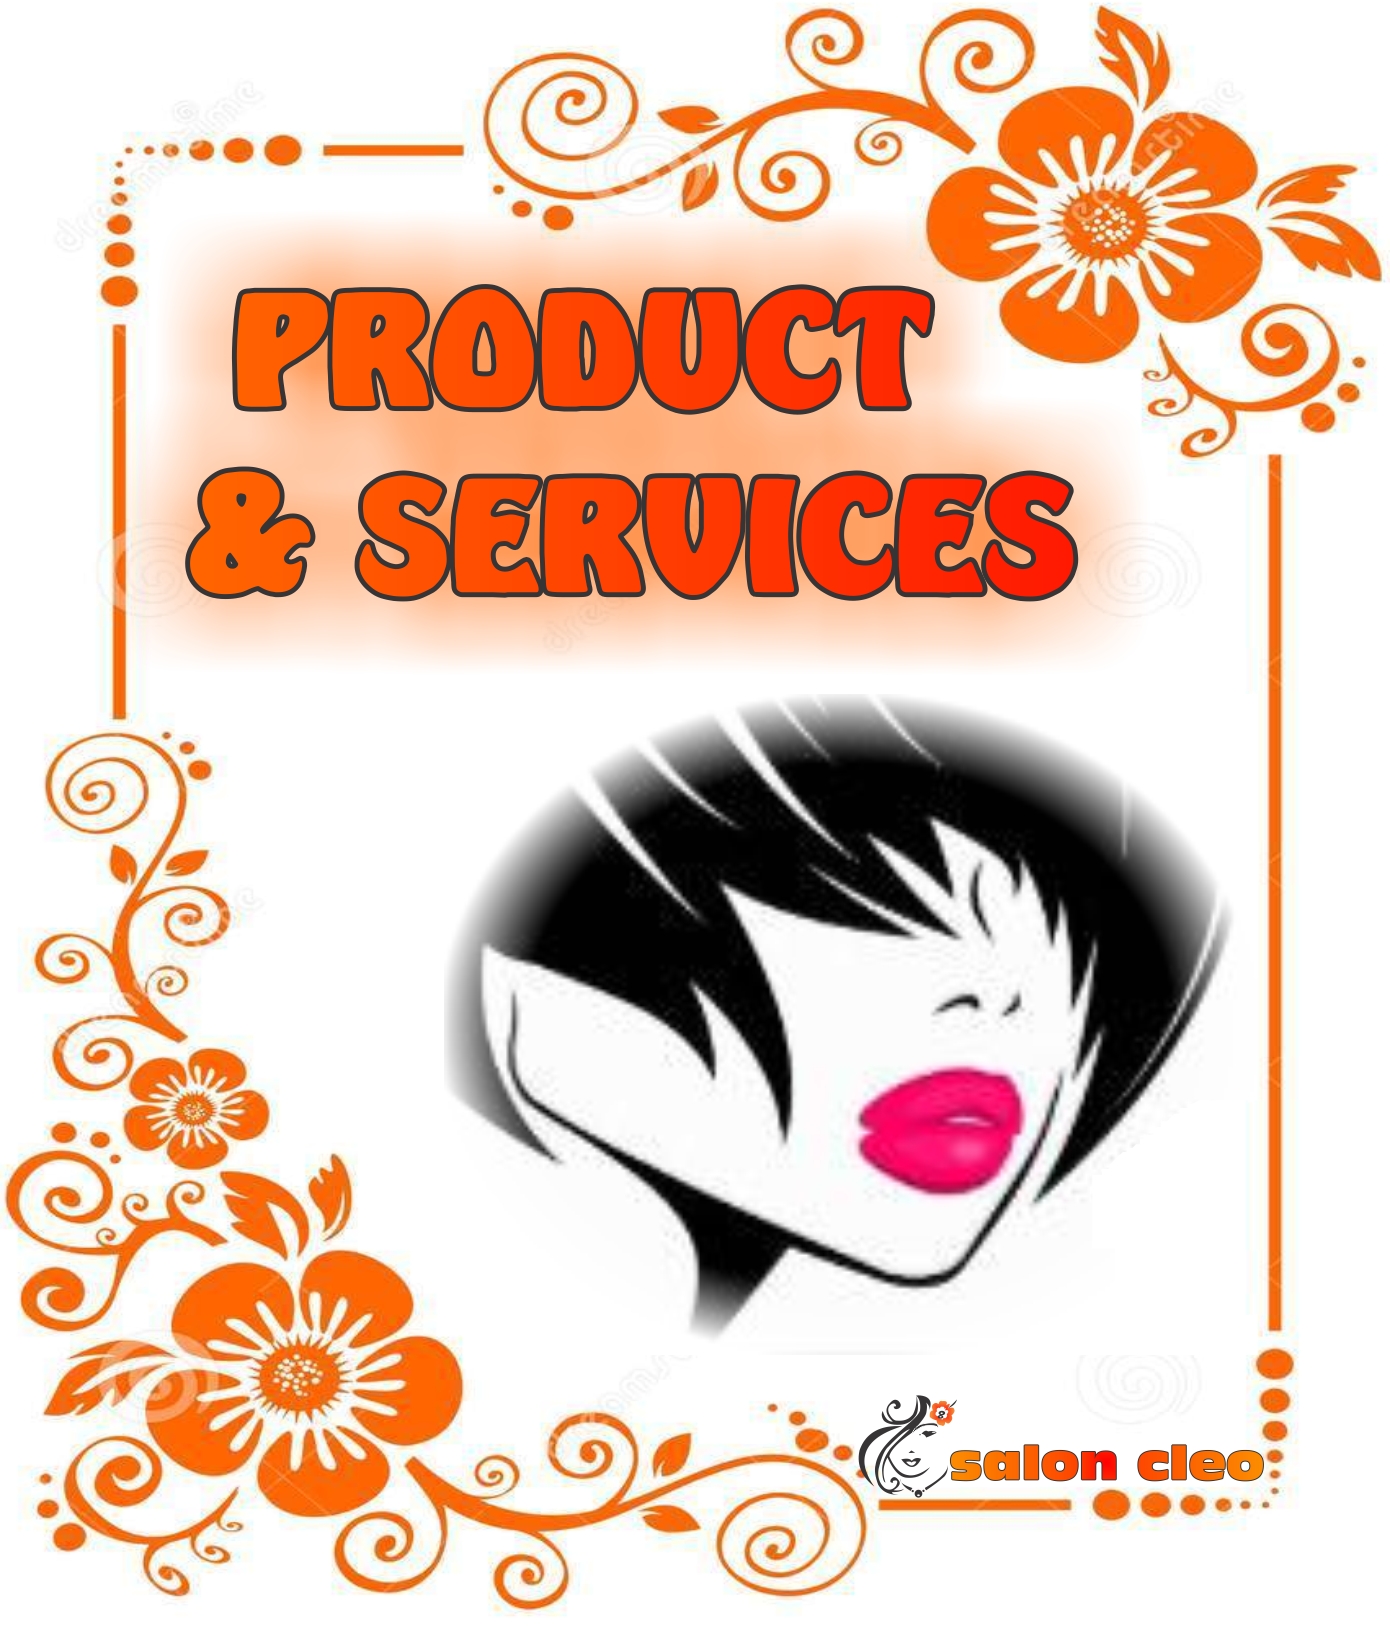 STOCKISTS OF GENUINE & ORIGINAL PERMANENT HAIR STRAIGHTENING TREATMENT DONE AT SALON CLEO DURBAN WITH GUARANTEED RESULTS. FREE PRODUCTS FOR TREATMENT AND AFTER CARE OF YOUR HAIR STRAIGHTENING TREATMENT. WE HAVE THE CHEAPEST DEAL IN KZN FOR ALL CURLY UNMANAGEABLE HAIR at SALON CLEO 0315002353 cloud 9 hair irons, ghd hair irons, coriolliss hair iron straighteners , BHE Hair iron Stylers...for the cheapest deal in all hair irons in South Africa Durban @ salon cleo 0315002353 durban phoenix 0315009998BHE Styler Hair iron launched 2015 in South Africa. Beautiful Hair Everyday all us today for a quote on your bridal package to suit your special day. call Nivi 0736100316 for all bridal packages. SALON CLEO bridal wedding packages KRYOLAN, PROFESSIONAL MAKE-UP. FOR A FLAWLESS SENSUOUS DELIIOUS GLOWING LOOK WITH A TOUCH OF EXTRAVAGANCE. KRYOLAN HAS 750 COLOR-INTENSE SHADES IS LOVED BY PROFESSIONAL MAKE-UP ARTISTS WORLDWIDE. FOUNDATIONS AND MAKE-UPS FOR THE CHEAPEST DEAL IN KRYOLAN COSMETIC PRODUCTS AT SALON CLEO PHOENIX 0315002353 ACRYLIC NAILS Finger nails are an important part of overall appearance to many women You lead a busy life , you deserve a little pampering Royal treatment , reasonable prices . its all yours at salon cleo ACRYLIC NAILS Finger nails are an important part of overall appearance to many women You lead a busy life , you deserve a little pampering Royal treatment , reasonable prices . its all yours at salon cleo Professional Hair stylist Nivi Deenanath SALON CLEO. Family business established for 30 years. with an enormous clientelle. We are a team of hair designers with the skills, the tools and the experience to create beautiful styles. We have spent years perfecting our craft so we can work together as a team to make you feel beautiful and confident and give you an amazing experience in our salon mage and personal facial looks is everything today. We at SALON CLEO give off 100% in making you look your very best with use of the correct facial products at the cheapest affordable rates. facials, waxing, threading, chemical peel facials, dermaplex facial products, justine facial products,kryolan facial costmetics products. salon cleo phoenix 0315002353 0315009998 GARCINIA CAMBOGIA WONDER WEIGHT LOSS CAPSULES now available. COOL LIPOLYSIS FAT FREEZING WEIGHT LOSS TREATEMENT PROCEDURE done at salon cleo. FAT BURNER WEIGHT LOSS CAPSULE ALSO AVAILABLE AT SALON CLEO DURBAN. FERRADIC HEAT WEIGHT LOSS PADS & ELECTRO MAGNETIC TONING WEIGHT LOSS PADS...These procedures now available at salon cleo . call NIVI 0736100316 today for a quick fix to you weight loss resolutions  SALON CLEO FOR THE CHEAPEST GHD HAIR IRON IN DURBAN SALON CLEO HAS THE CHEAPEST DEAL IN CLOUD NINE HAIR IRON IN DURBAN SALON CLEO ONLY KEEPS GENUINE HAIR IRON STRAIGHTENERS SALON CLEO FOR THE CHEAPEST PRICE ON CARAOLIS HAIR IRONSSALON CLEO FOR THE CHEAPEST PRICE DEAL ON ALL CORIOLIS HAIR IRONS GHD GHD GHD GHD SALES GHD CHEAPEST GHD CHEAPEST GHD HAIR IRONS SALON CLEO SALON CLEO GHD SALON CLEO CLOUD 9 SALON CLEO CLOUD NINE SALON CLEO CARAOLIS HAIR IRON SALON CLEO CORIOLIS HAIR IRONS GHD HAIR IRON REPAIRS CLOUD NINE HAIR IRON REPAIRS DURBAN CORIOLIS HAIR IRON REPAIRS DURBAN RCS CREDIT CARDS ACCEPTED HERE AT OUR STORE FOR PURCHASE OF YOUR CORIOLLIS HAIR IRON.RCS PURCHASES GHD HAIRS IRONS RCS PURCHASES CLOUD 9 HAIR IRONS RCS PURCHASES CLOUD NINE HAIR IRON APPLICATIONS NOW DONE INSTORE FOR AN RCS CREDIT CARD & FEEDBACK WITH 48 HOURS.COROILIS HAIR IRON REPAIRS DURBAN HAIR IRON REPAIR CENTRE DURBAN GHD REPAIRS DURBAN GHD HAIR IRON REPAIRS PROFFESSIONALLY DONE IN DURBAN PHOENIX  CHEAPEST PRICE ON ALL HAIR IRONS GHD CLOUD 9 CLOUD NINE CARIOLIS CORIOLIS GHD HAIR IRONS DURBAN SALON CLEO PHOENIX Salon Cleo is the cheapest Stockists  of GHD HAIR IRONS, CLOUD 9 HAIR IRONS, CARIOLIS HAIR IRON GHD NEW RANGE HAIR IRONS:GHD ECLIPSE NOW AVAILABLE AT SALON CLEO PHOENIX DURBAN 0315009998 CLOUD NINE MENS MINI STYLERS...CLOUD 9 THE TOUCH HAIR IRON...NEW RANGE OF THE CLOUD NINE SERIES.CLOUD 9 ON AN EXTREMLY LOW SPECIAL AT R1750 (CASH ONLY) ONLY AT SALON CLEO KZN DURBAN 0315002353....0315009998SALON CLEO HAS THE  CHEAPEST DEAL ON CLOUD NINE HAIR IRON STRAIGHTENERS in Durban Kzn.Salon Cleo is the cheapest Stockists of GHD HAIR IRONS, CLOUD 9 HAIR IRONS, CORIOLLIS HAIR IRONCLOUD 9 MENS MINI STYLERS...CLOUD NINE THE TOUCH HAIR IRON....CLOUD 9  BHE HAIR IRON STYLERSBeautiful Hair Everyday  The unique BHE Styler protects your hair while you style, thanks to its SMART plates that help to keep your hair healthy and strong.  The BHE Styler SMART plates include: Kera Therapy protein infused plates assists in smoothing the cuticles and heal the hair, in time of split ends and damaged hair Keratin is a naturally occurring protein, which is a vital element in strong, healthy hair. Next generation ceramic plates are infused with Keratin proteins that transfer to your hair during styling and last the life of the product GHD CLOUD9 BHE CORIOLISS HAIR IRON STRAIGHTENERS HAIR IRON STYLERS